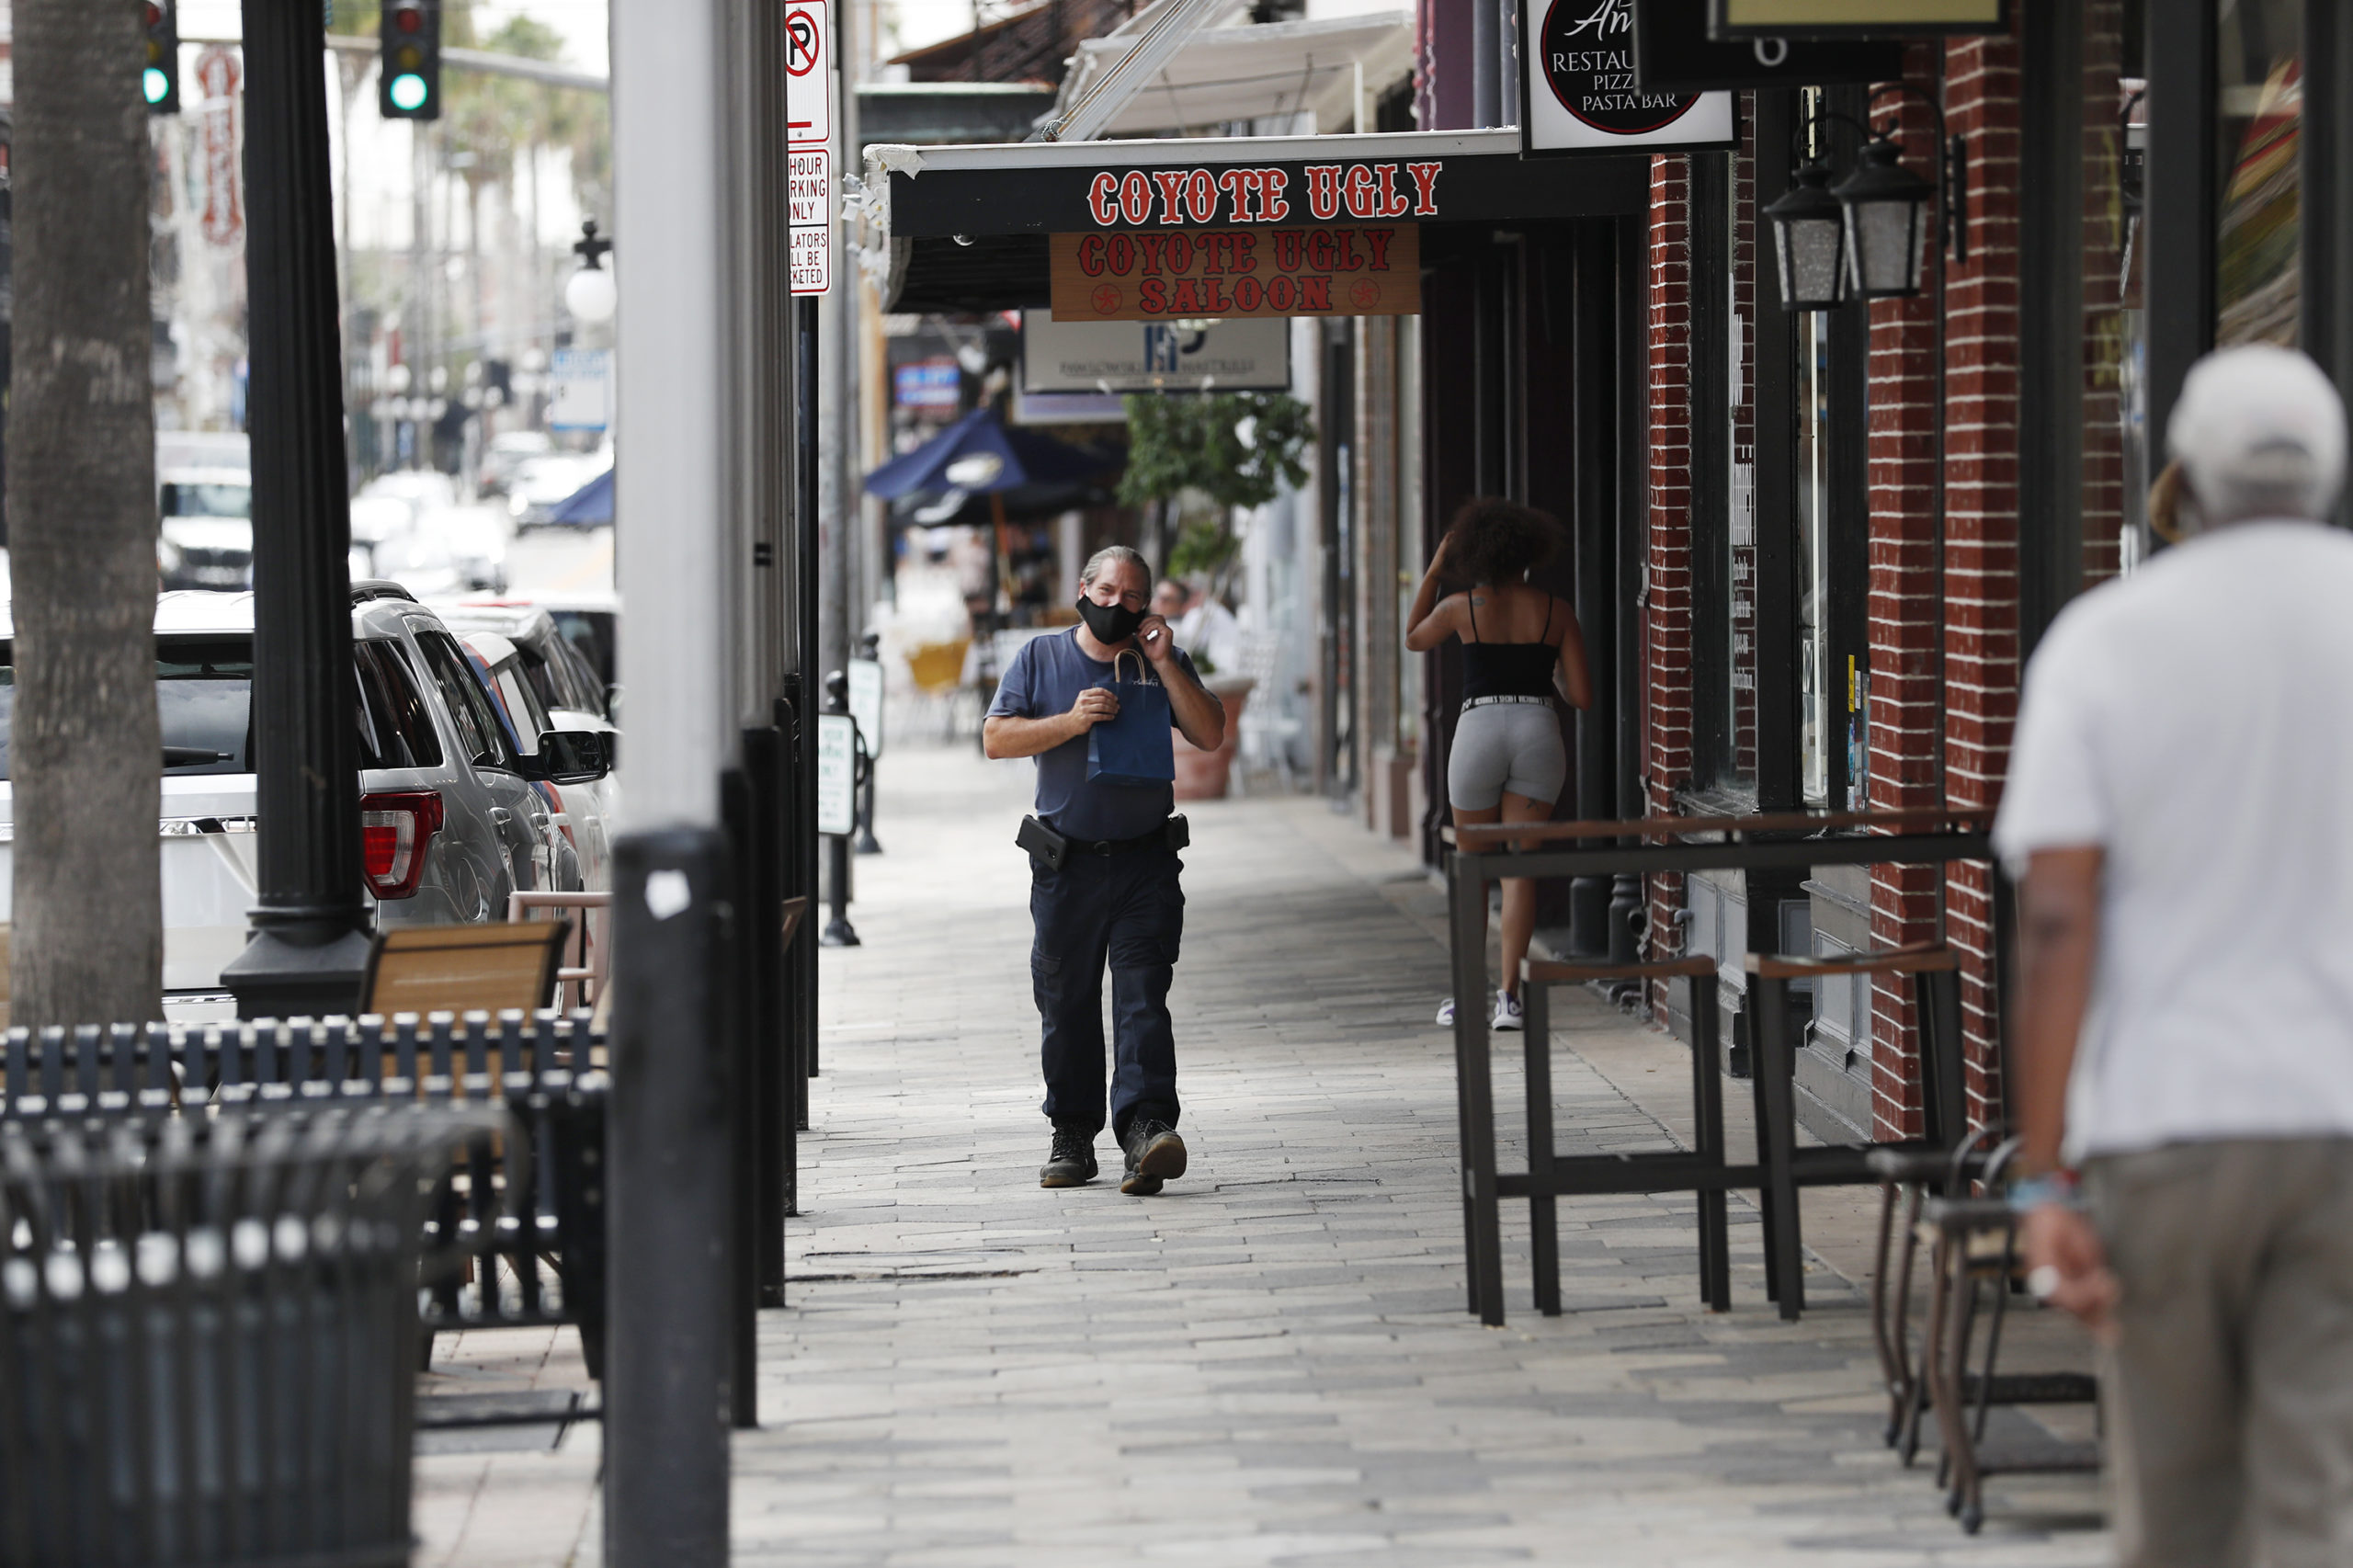 TAMPA, FL - JUNE 26: A unidentified man wearing a mask walks on 7th Avenue in the Ybor City neighborhood on June 26, 2020 in Tampa, Florida. Florida surpasses previous single-day high for positive coronavirus cases on Friday, recording 8,942 new infections over the course of 24 hours, according to Florida Department of Health statistics. (Photo by Octavio Jones/Getty Images)